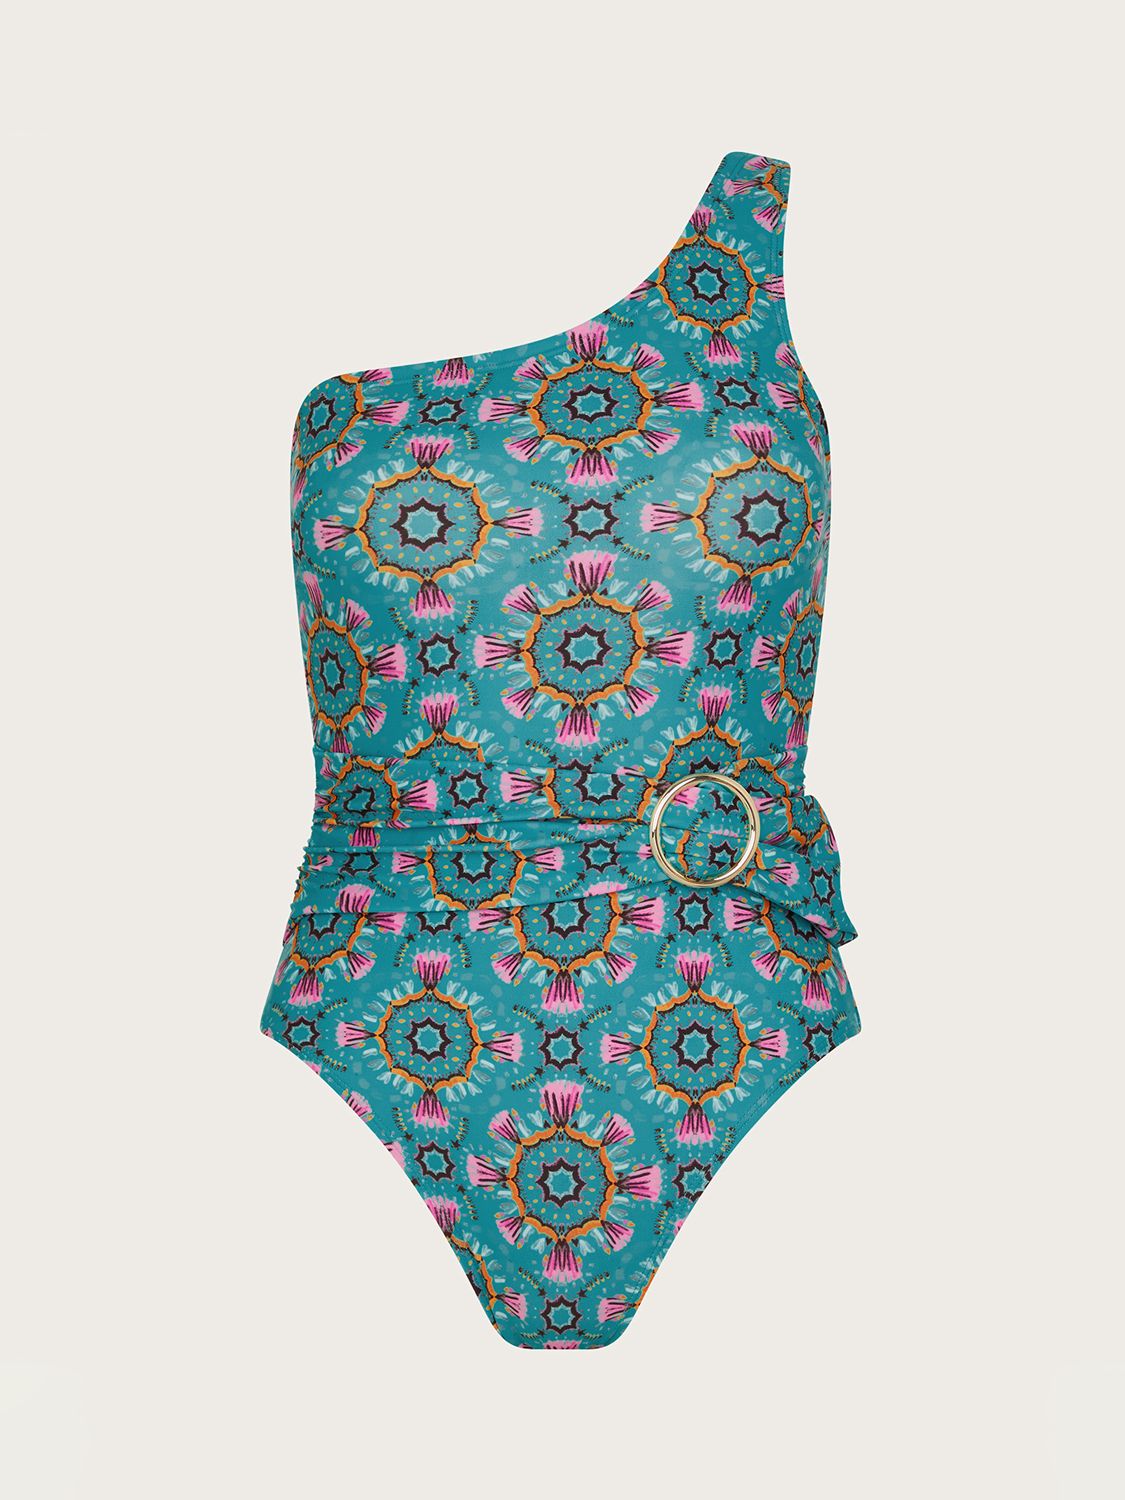 Monsoon Carla Belted One Shoulder Swimsuit, Teal/Multi, 8